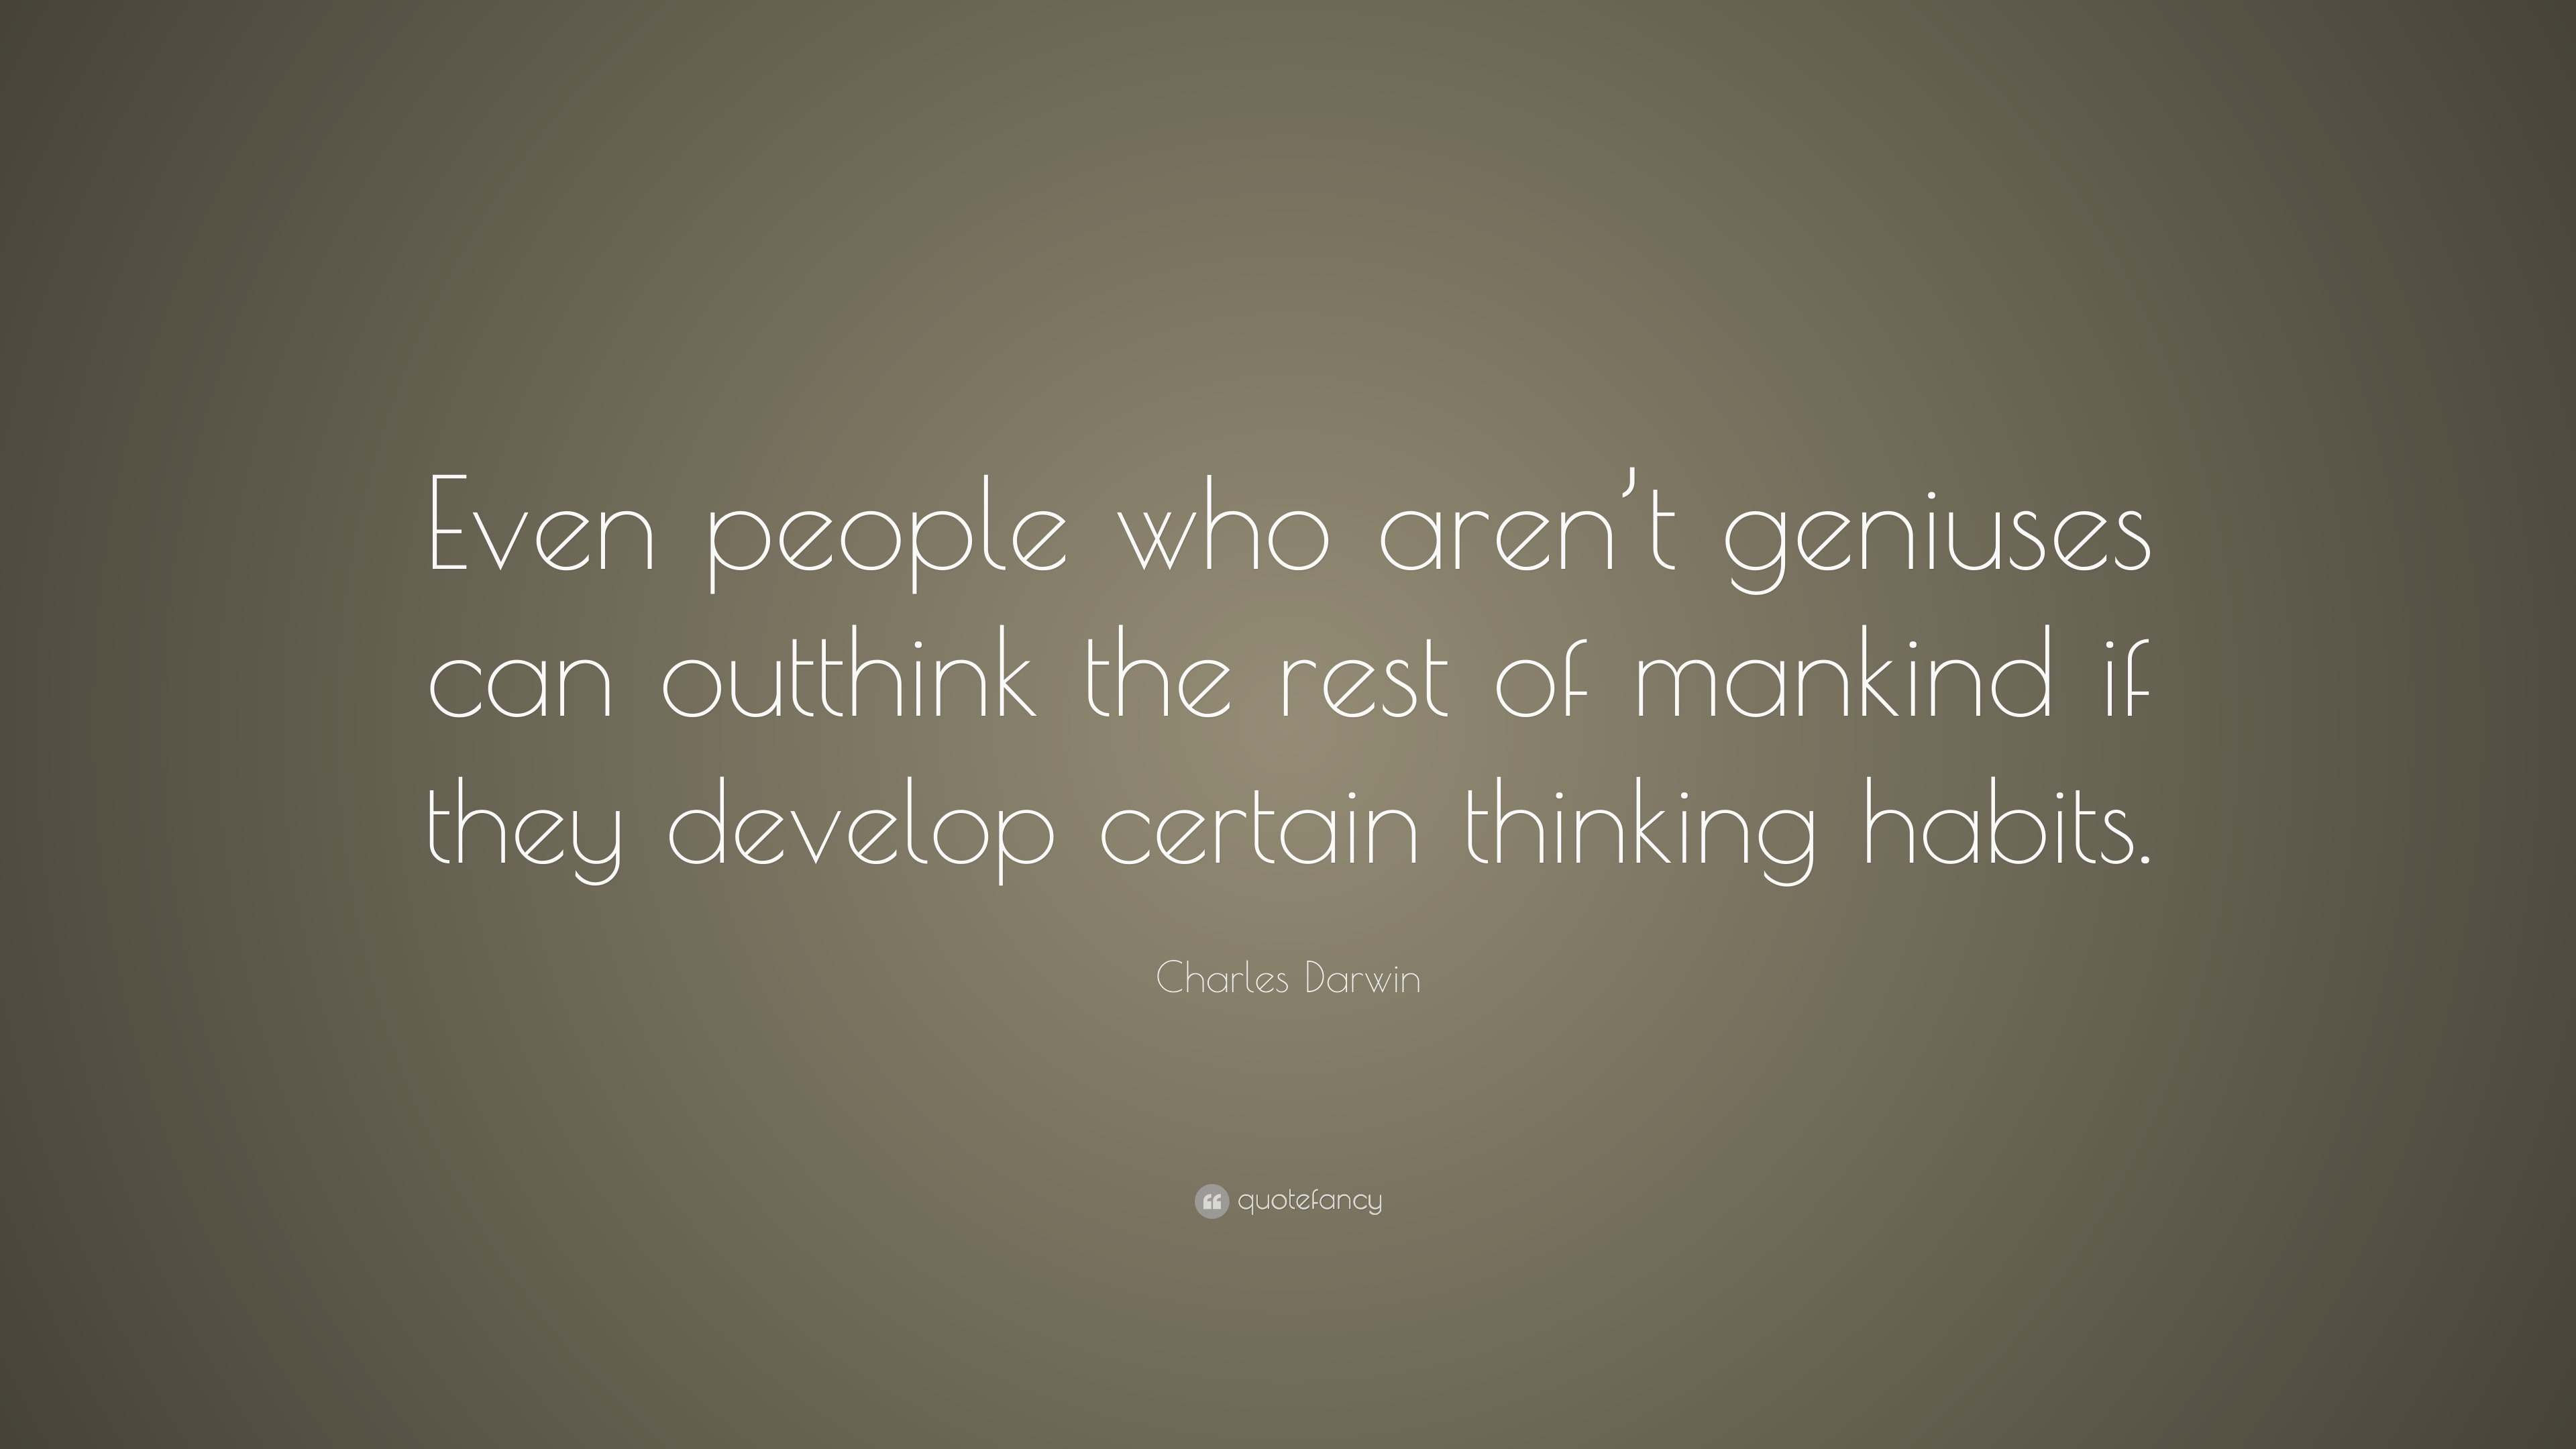 Charles Darwin Quote: “Even people who aren’t geniuses can outthink the ...